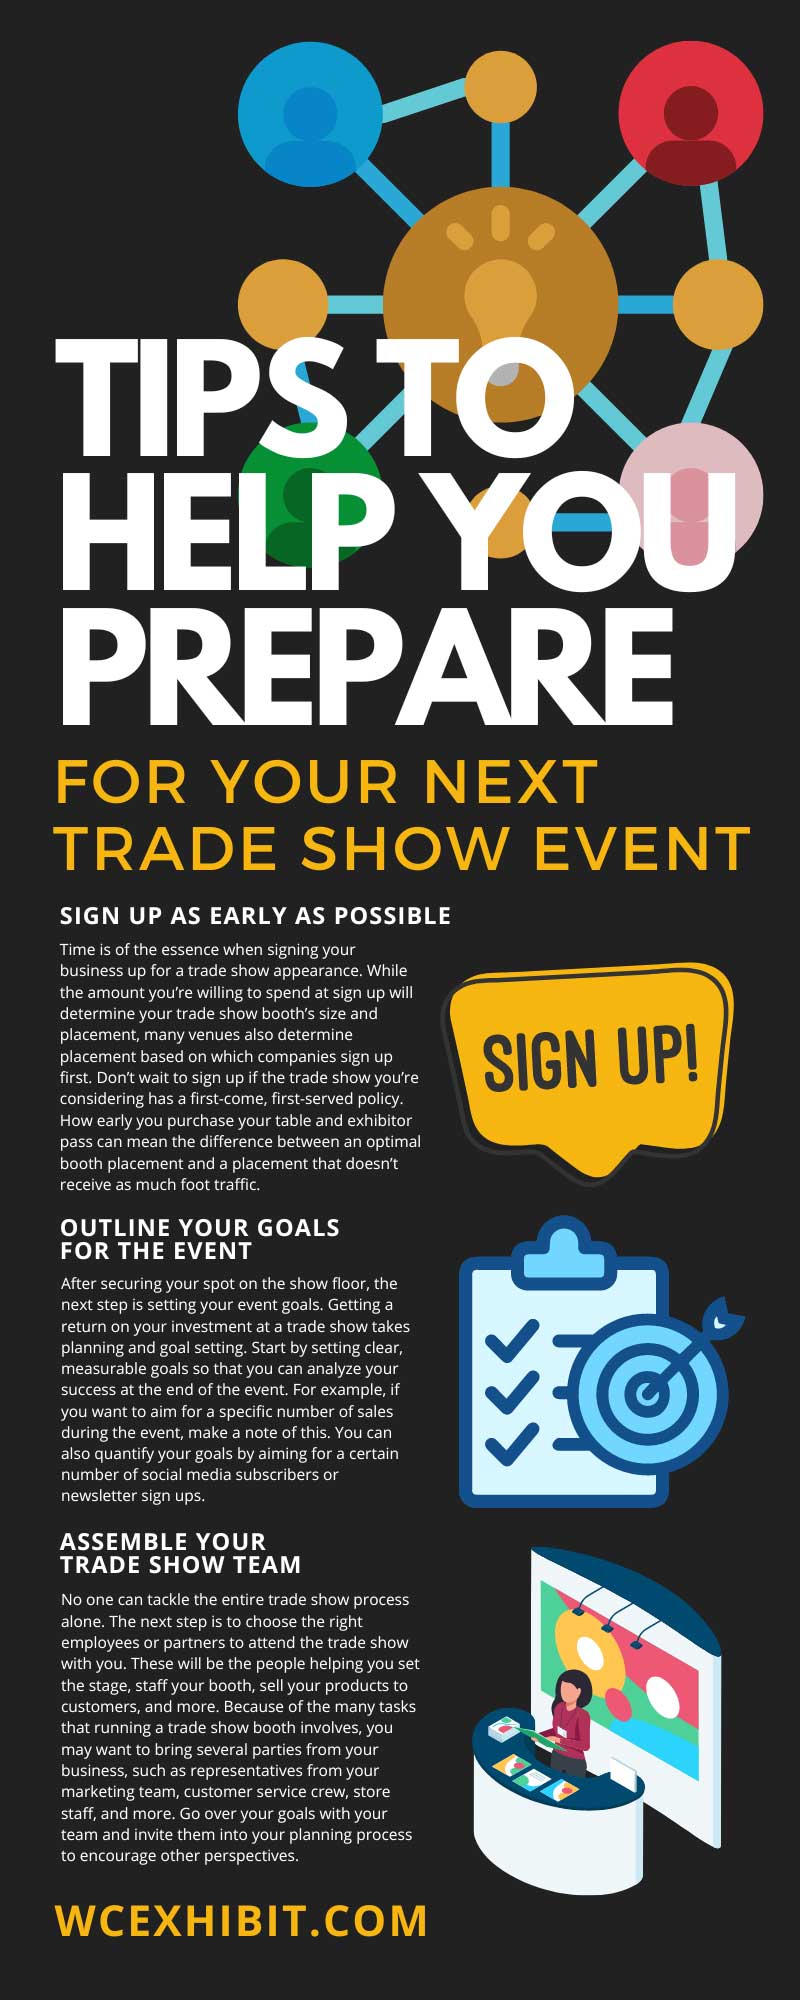 Tips To Help You Prepare for Your Next Trade Show Event